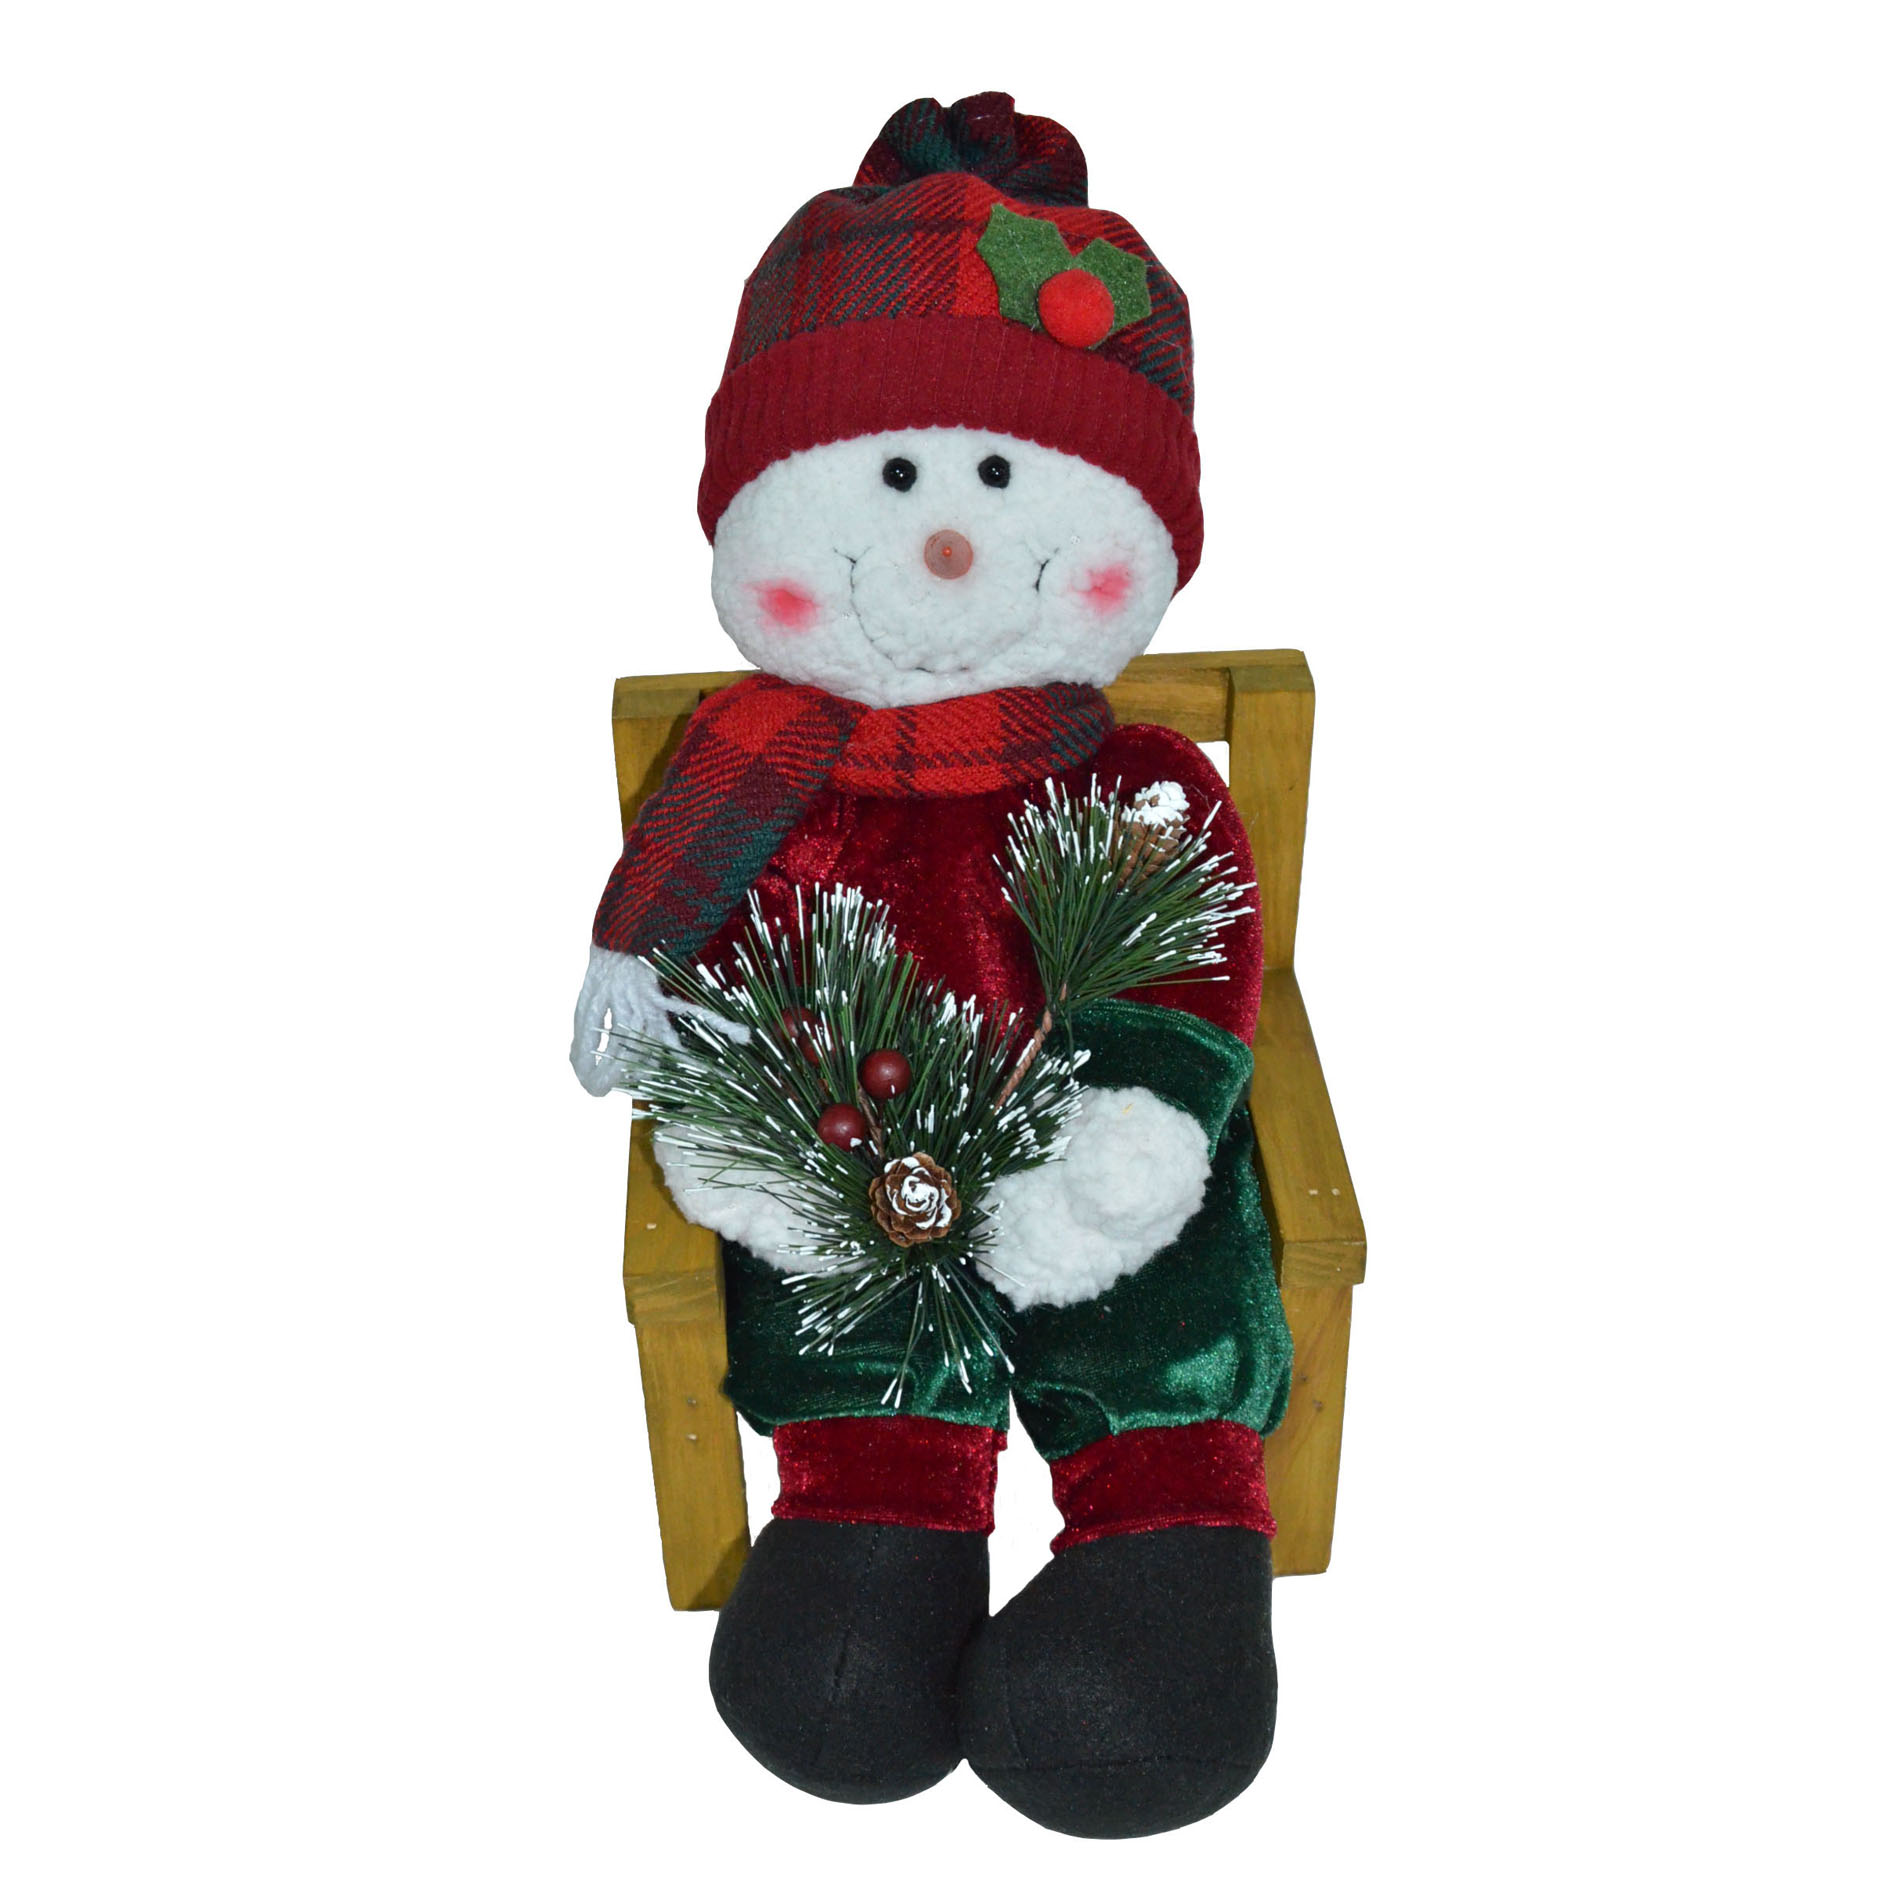 Trimming Traditions 11.5" Fabric Snowman with Knit Hat Character on Wood Chair